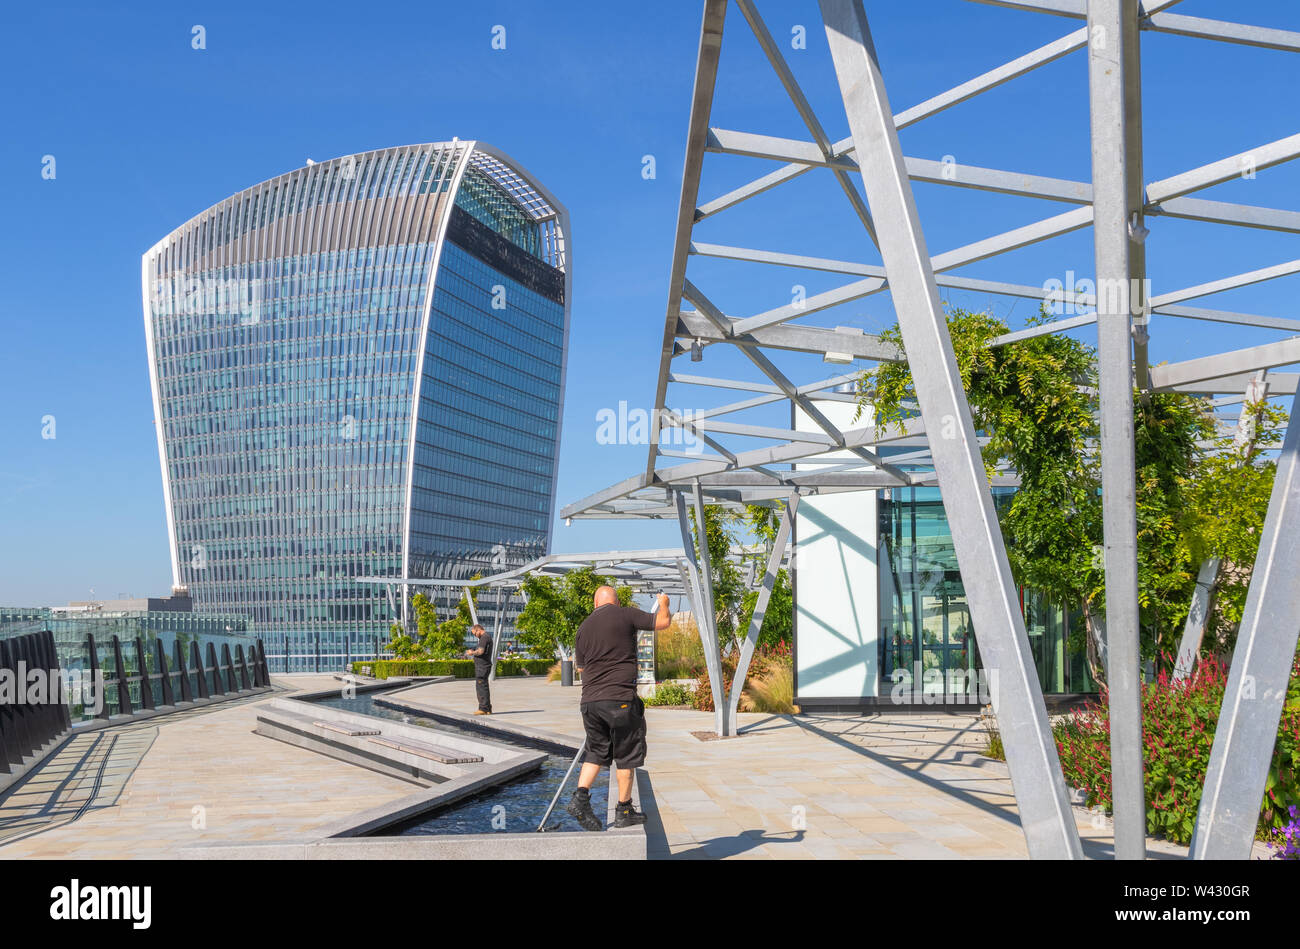 London, UK - July 16, 2019 - 20 Fenchurch Street building seen from The Garden at 120, a roof garden in the city of London Stock Photo